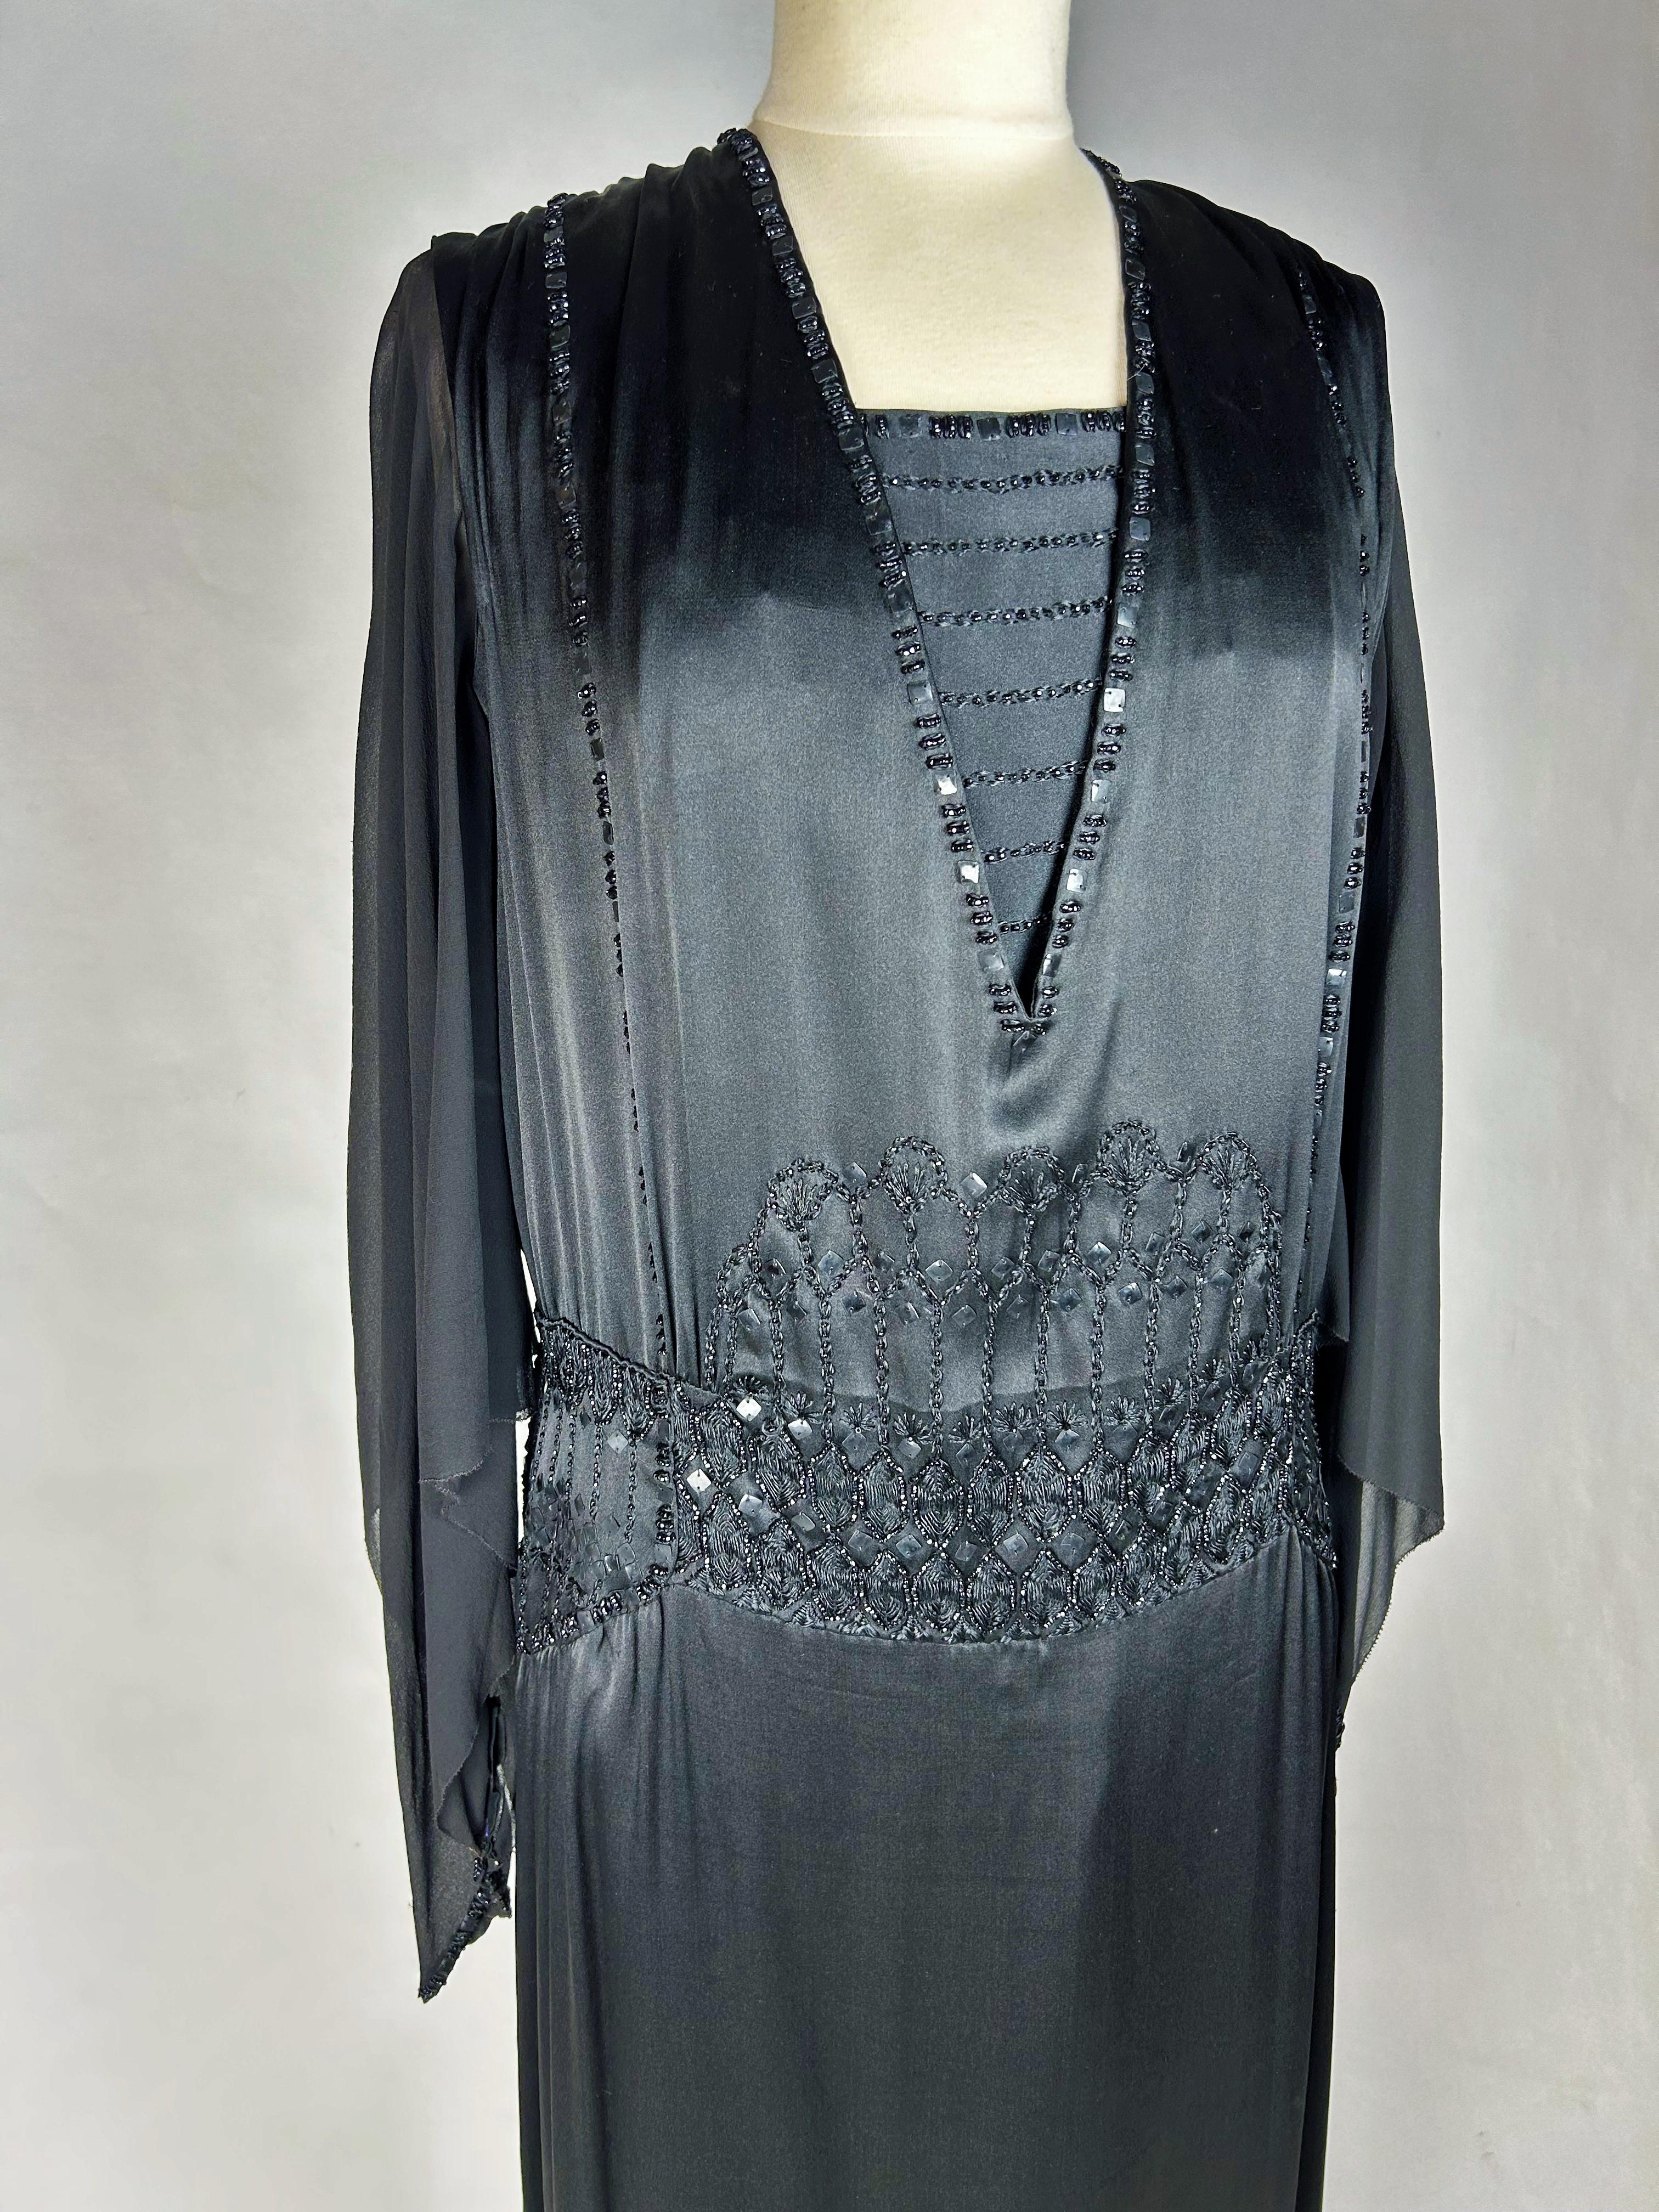 Circa 1920-1930

France Paris

Duchesse satin and black muslin long evening dress by Olivan-Brevet & Berthe, 14 Rue de Helder, Paris, dating from the 1920s. Loose-fitting dress with large V-neckline punctuated by a modesty detail, fastened on one